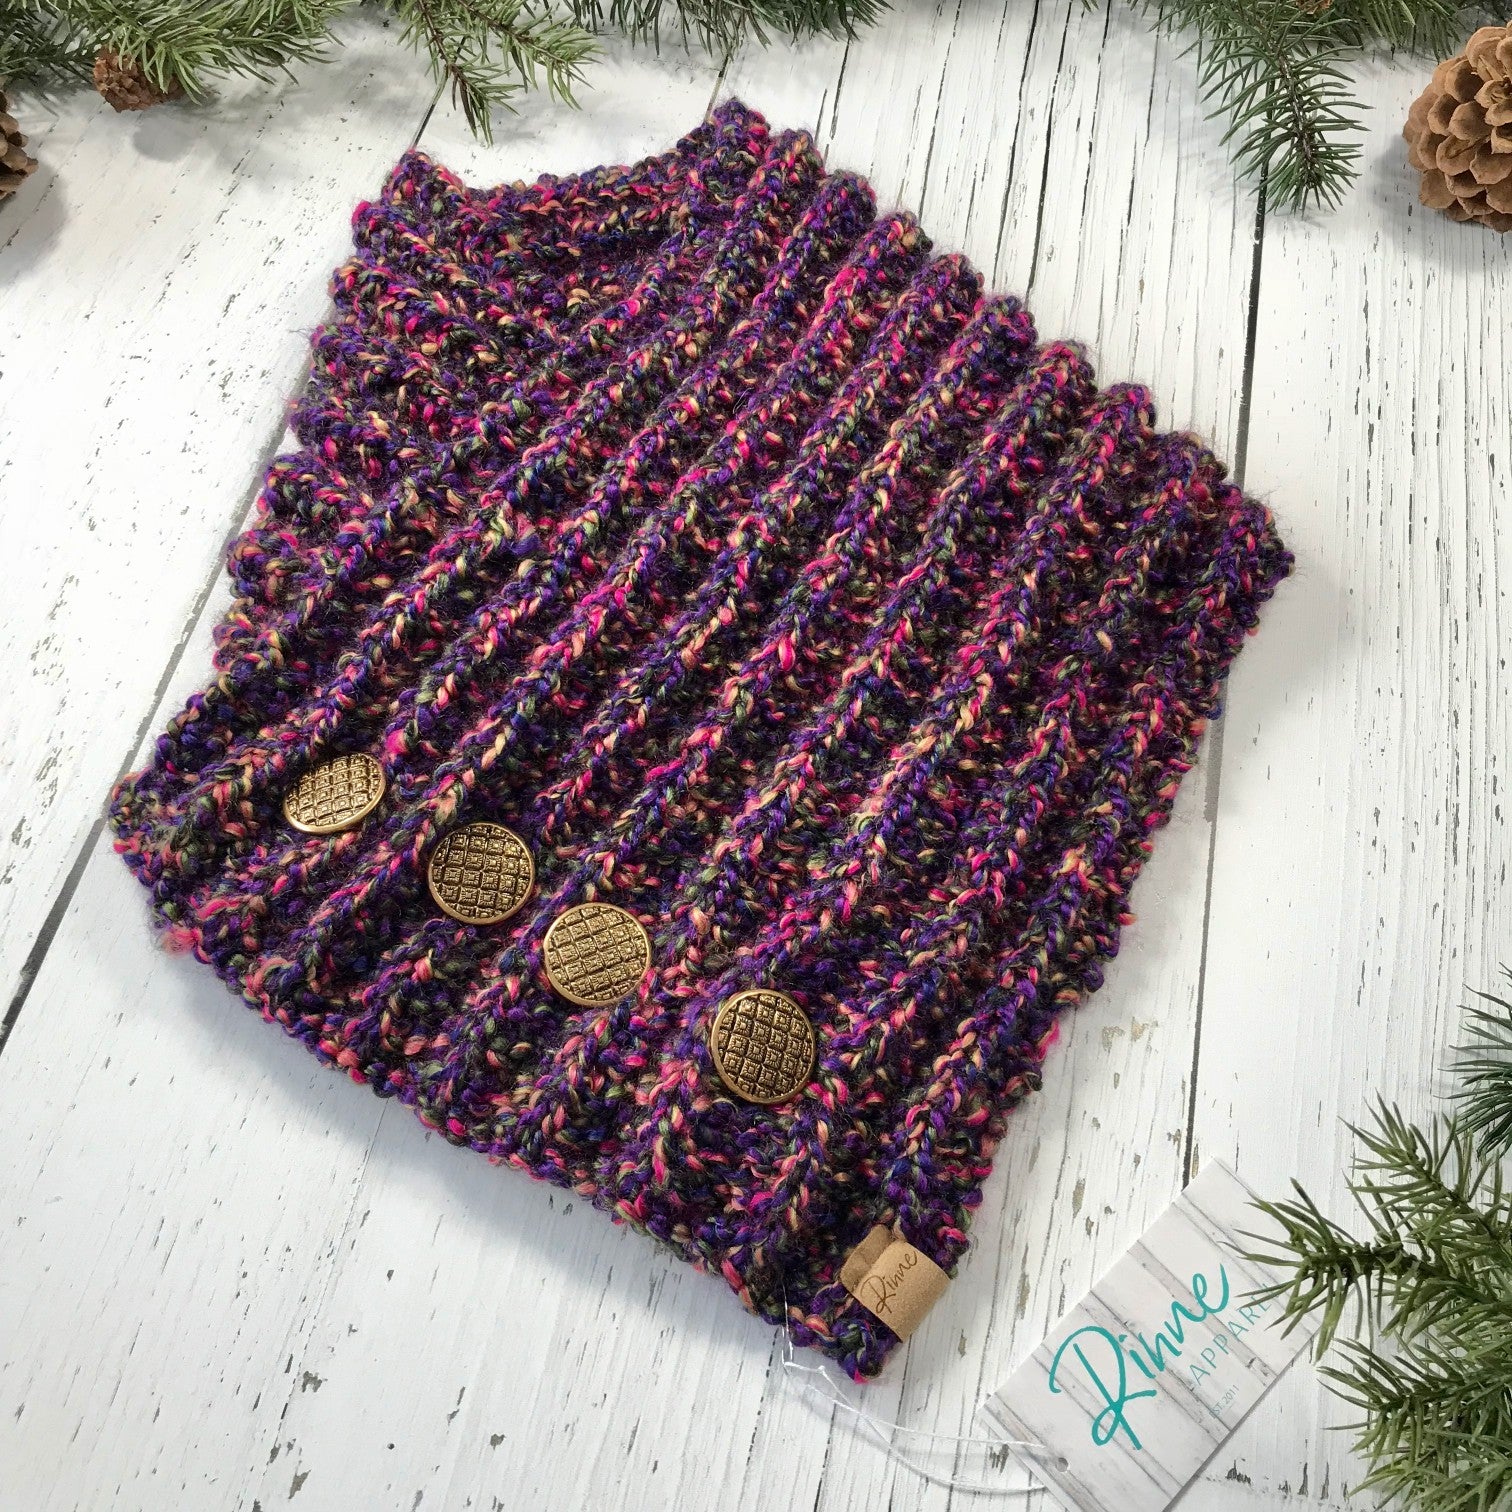 Classic Knit Button Cowl in pink, purple, olive green, and yellow with vintage gold buttons